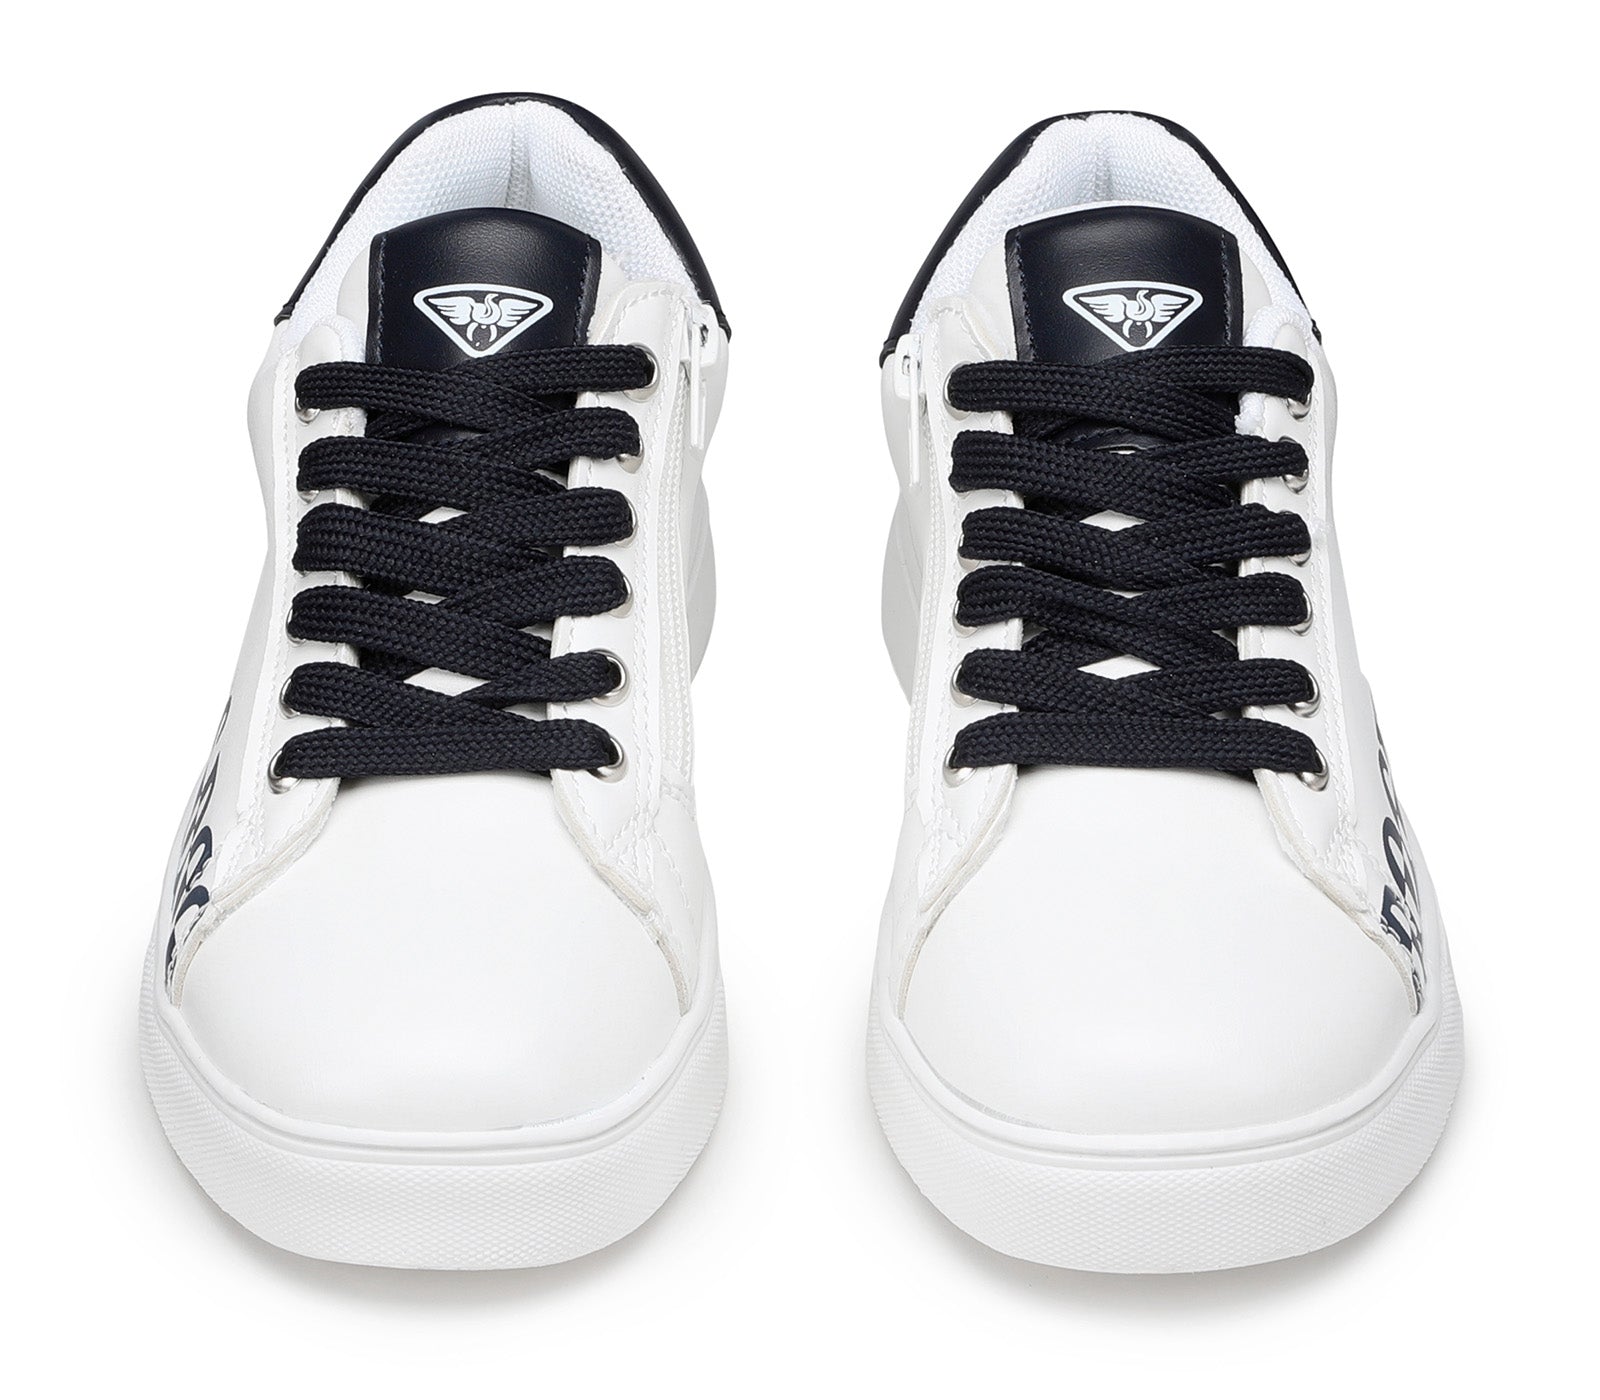 Black and White Child Sneakers